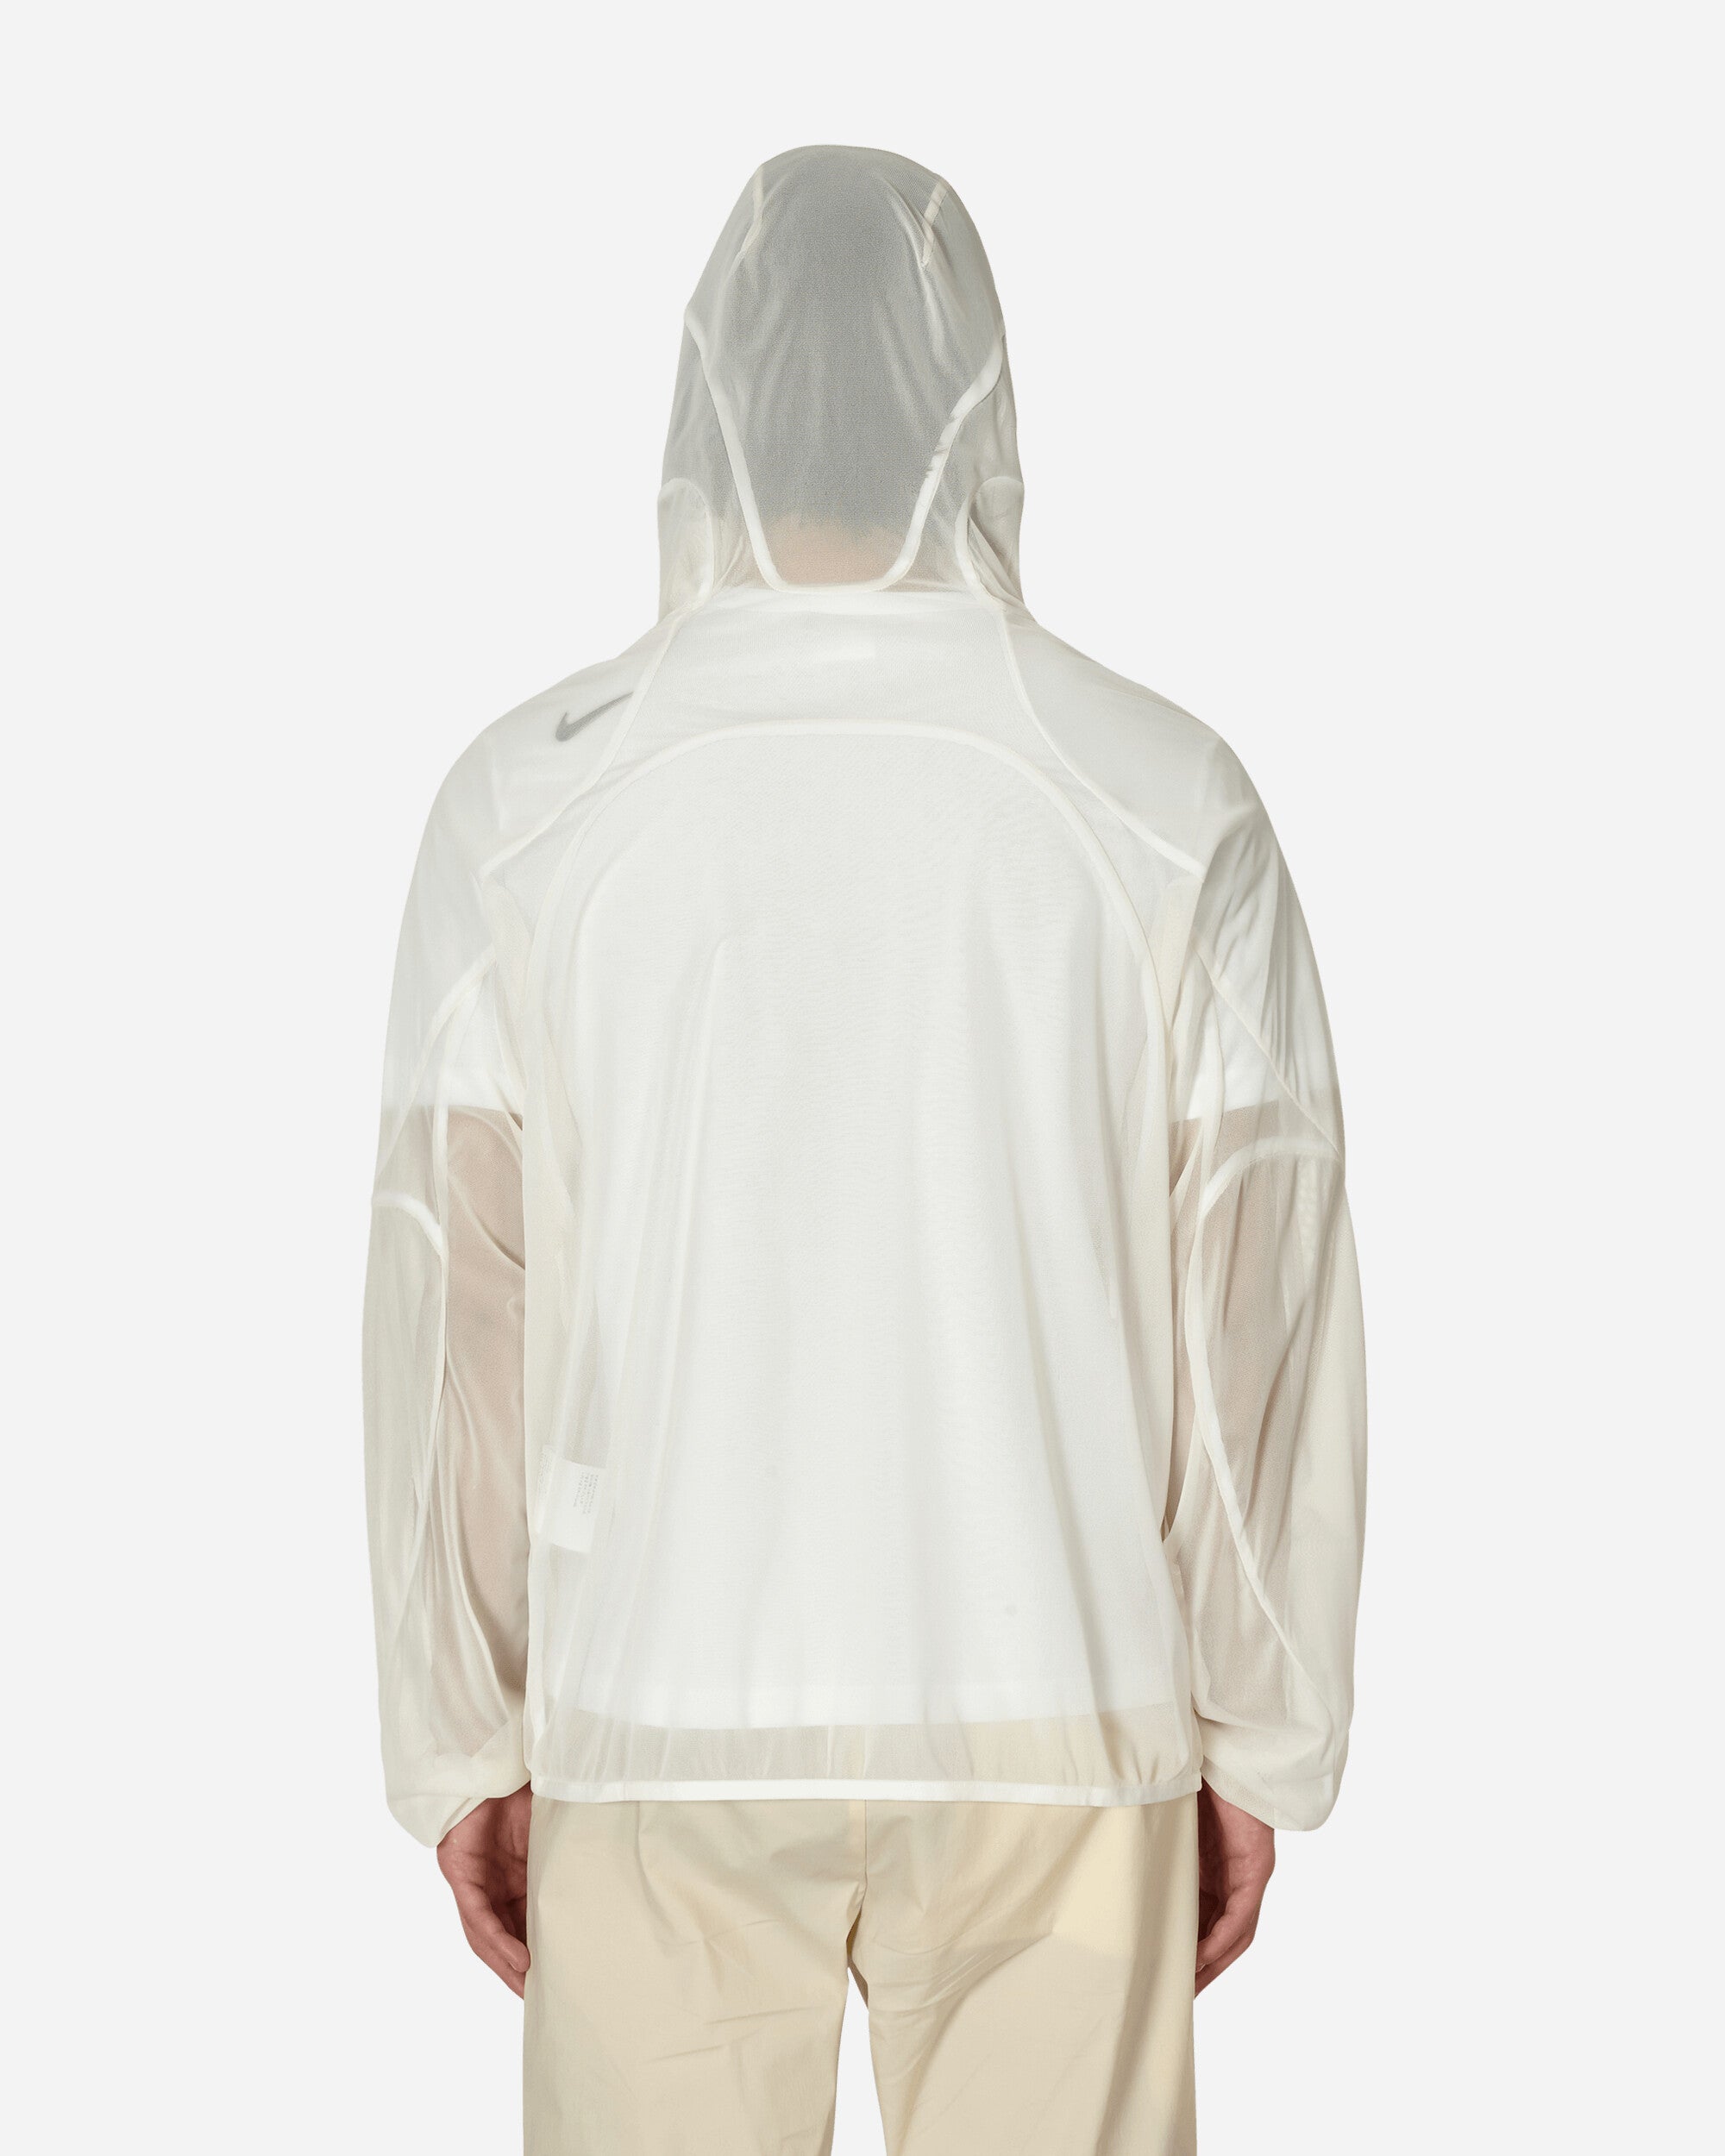 Post Archive Faction (PAF) 5.0+ Hoodie Center White  Sweatshirts Hoodies 50THCW WHITE 